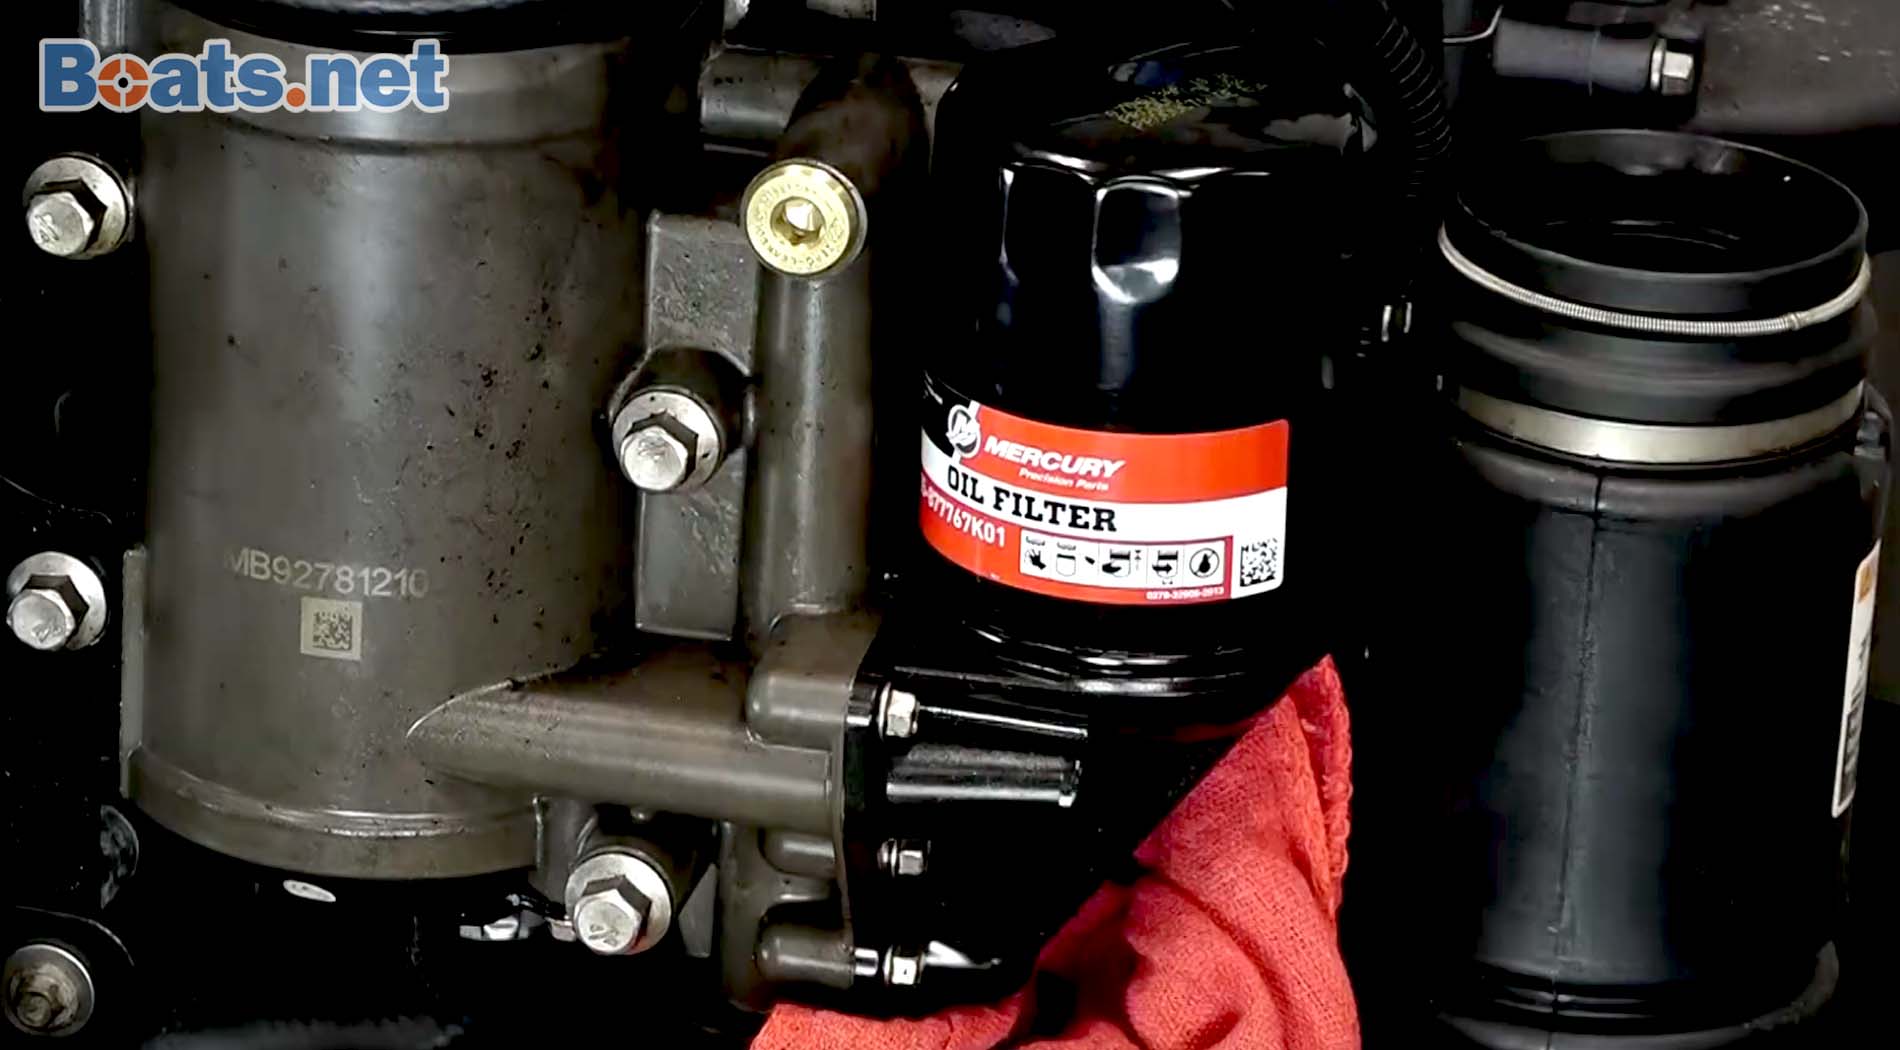 Winterize Mercury outboard oil change and filter